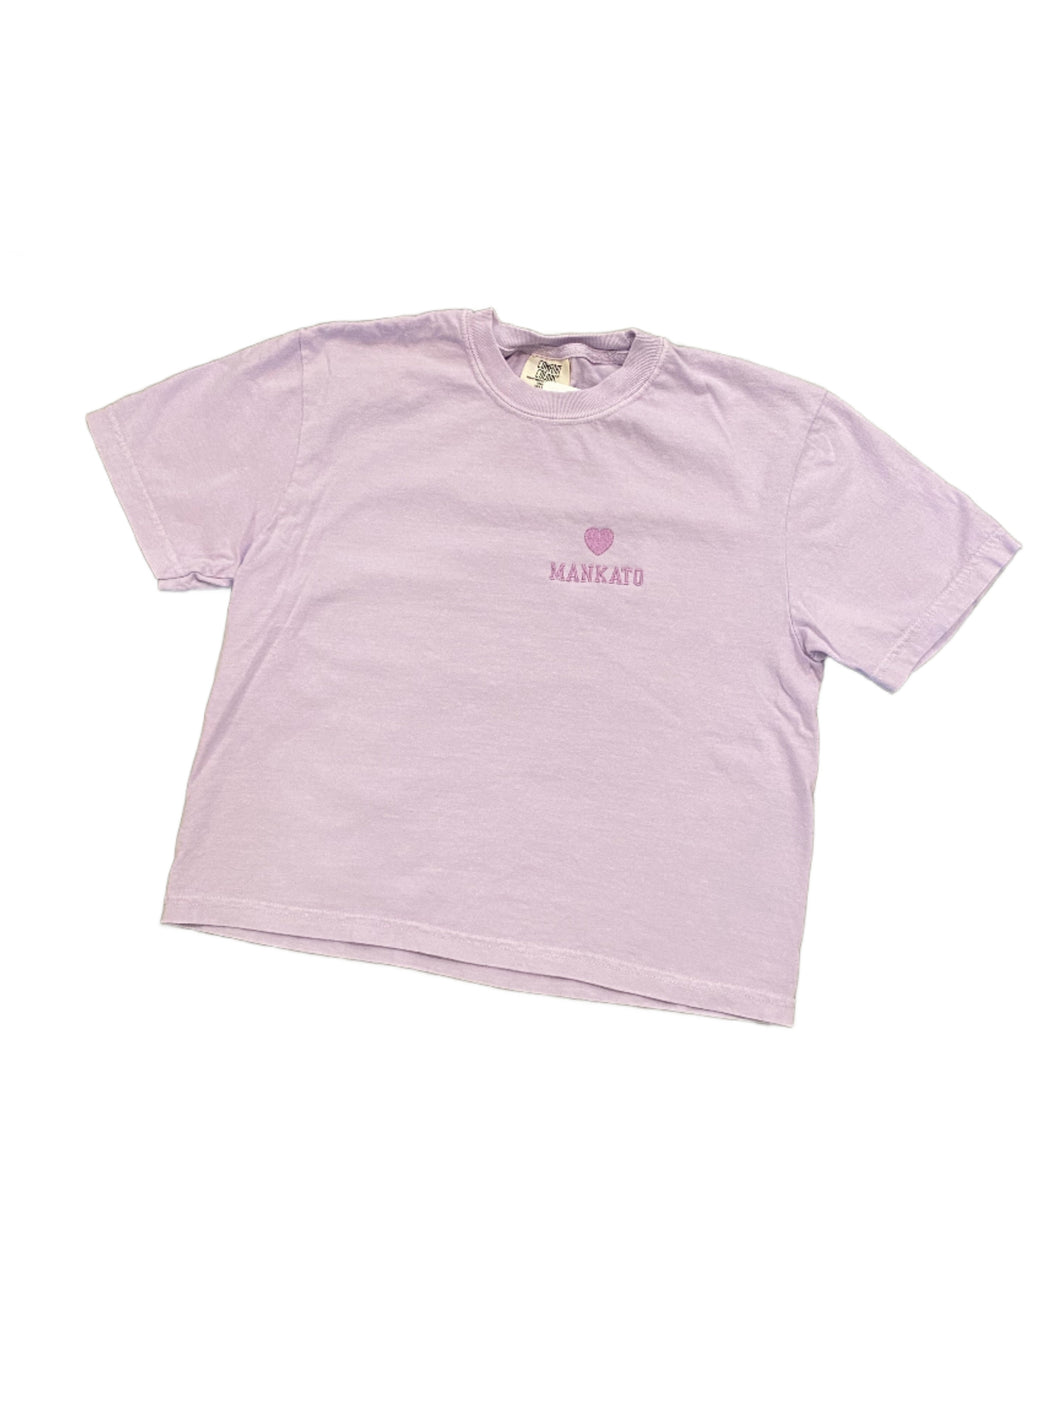 Embroidered Mankato Cropped Tee - Orchid